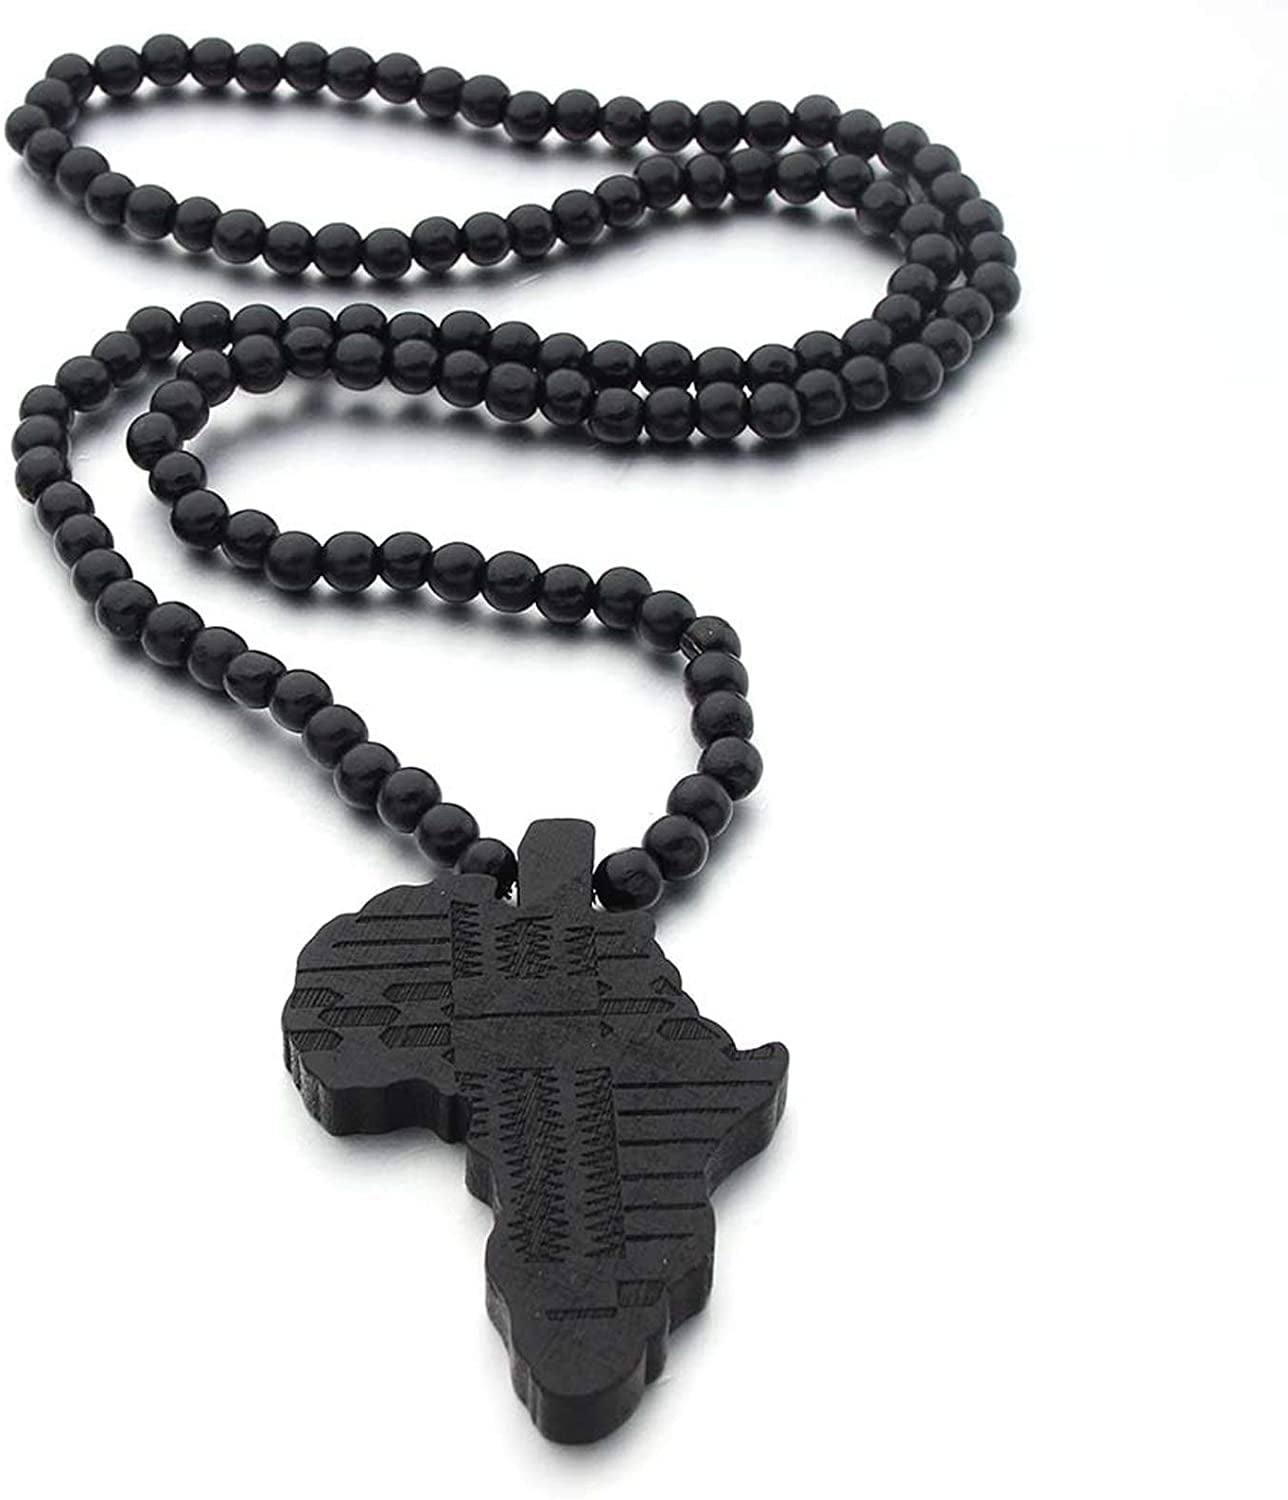 NEW MENS AFRICA MAP GOOD WOOD INSPIRED  AFRICAN WOODEN BEAD CHAIN NECKLACE 